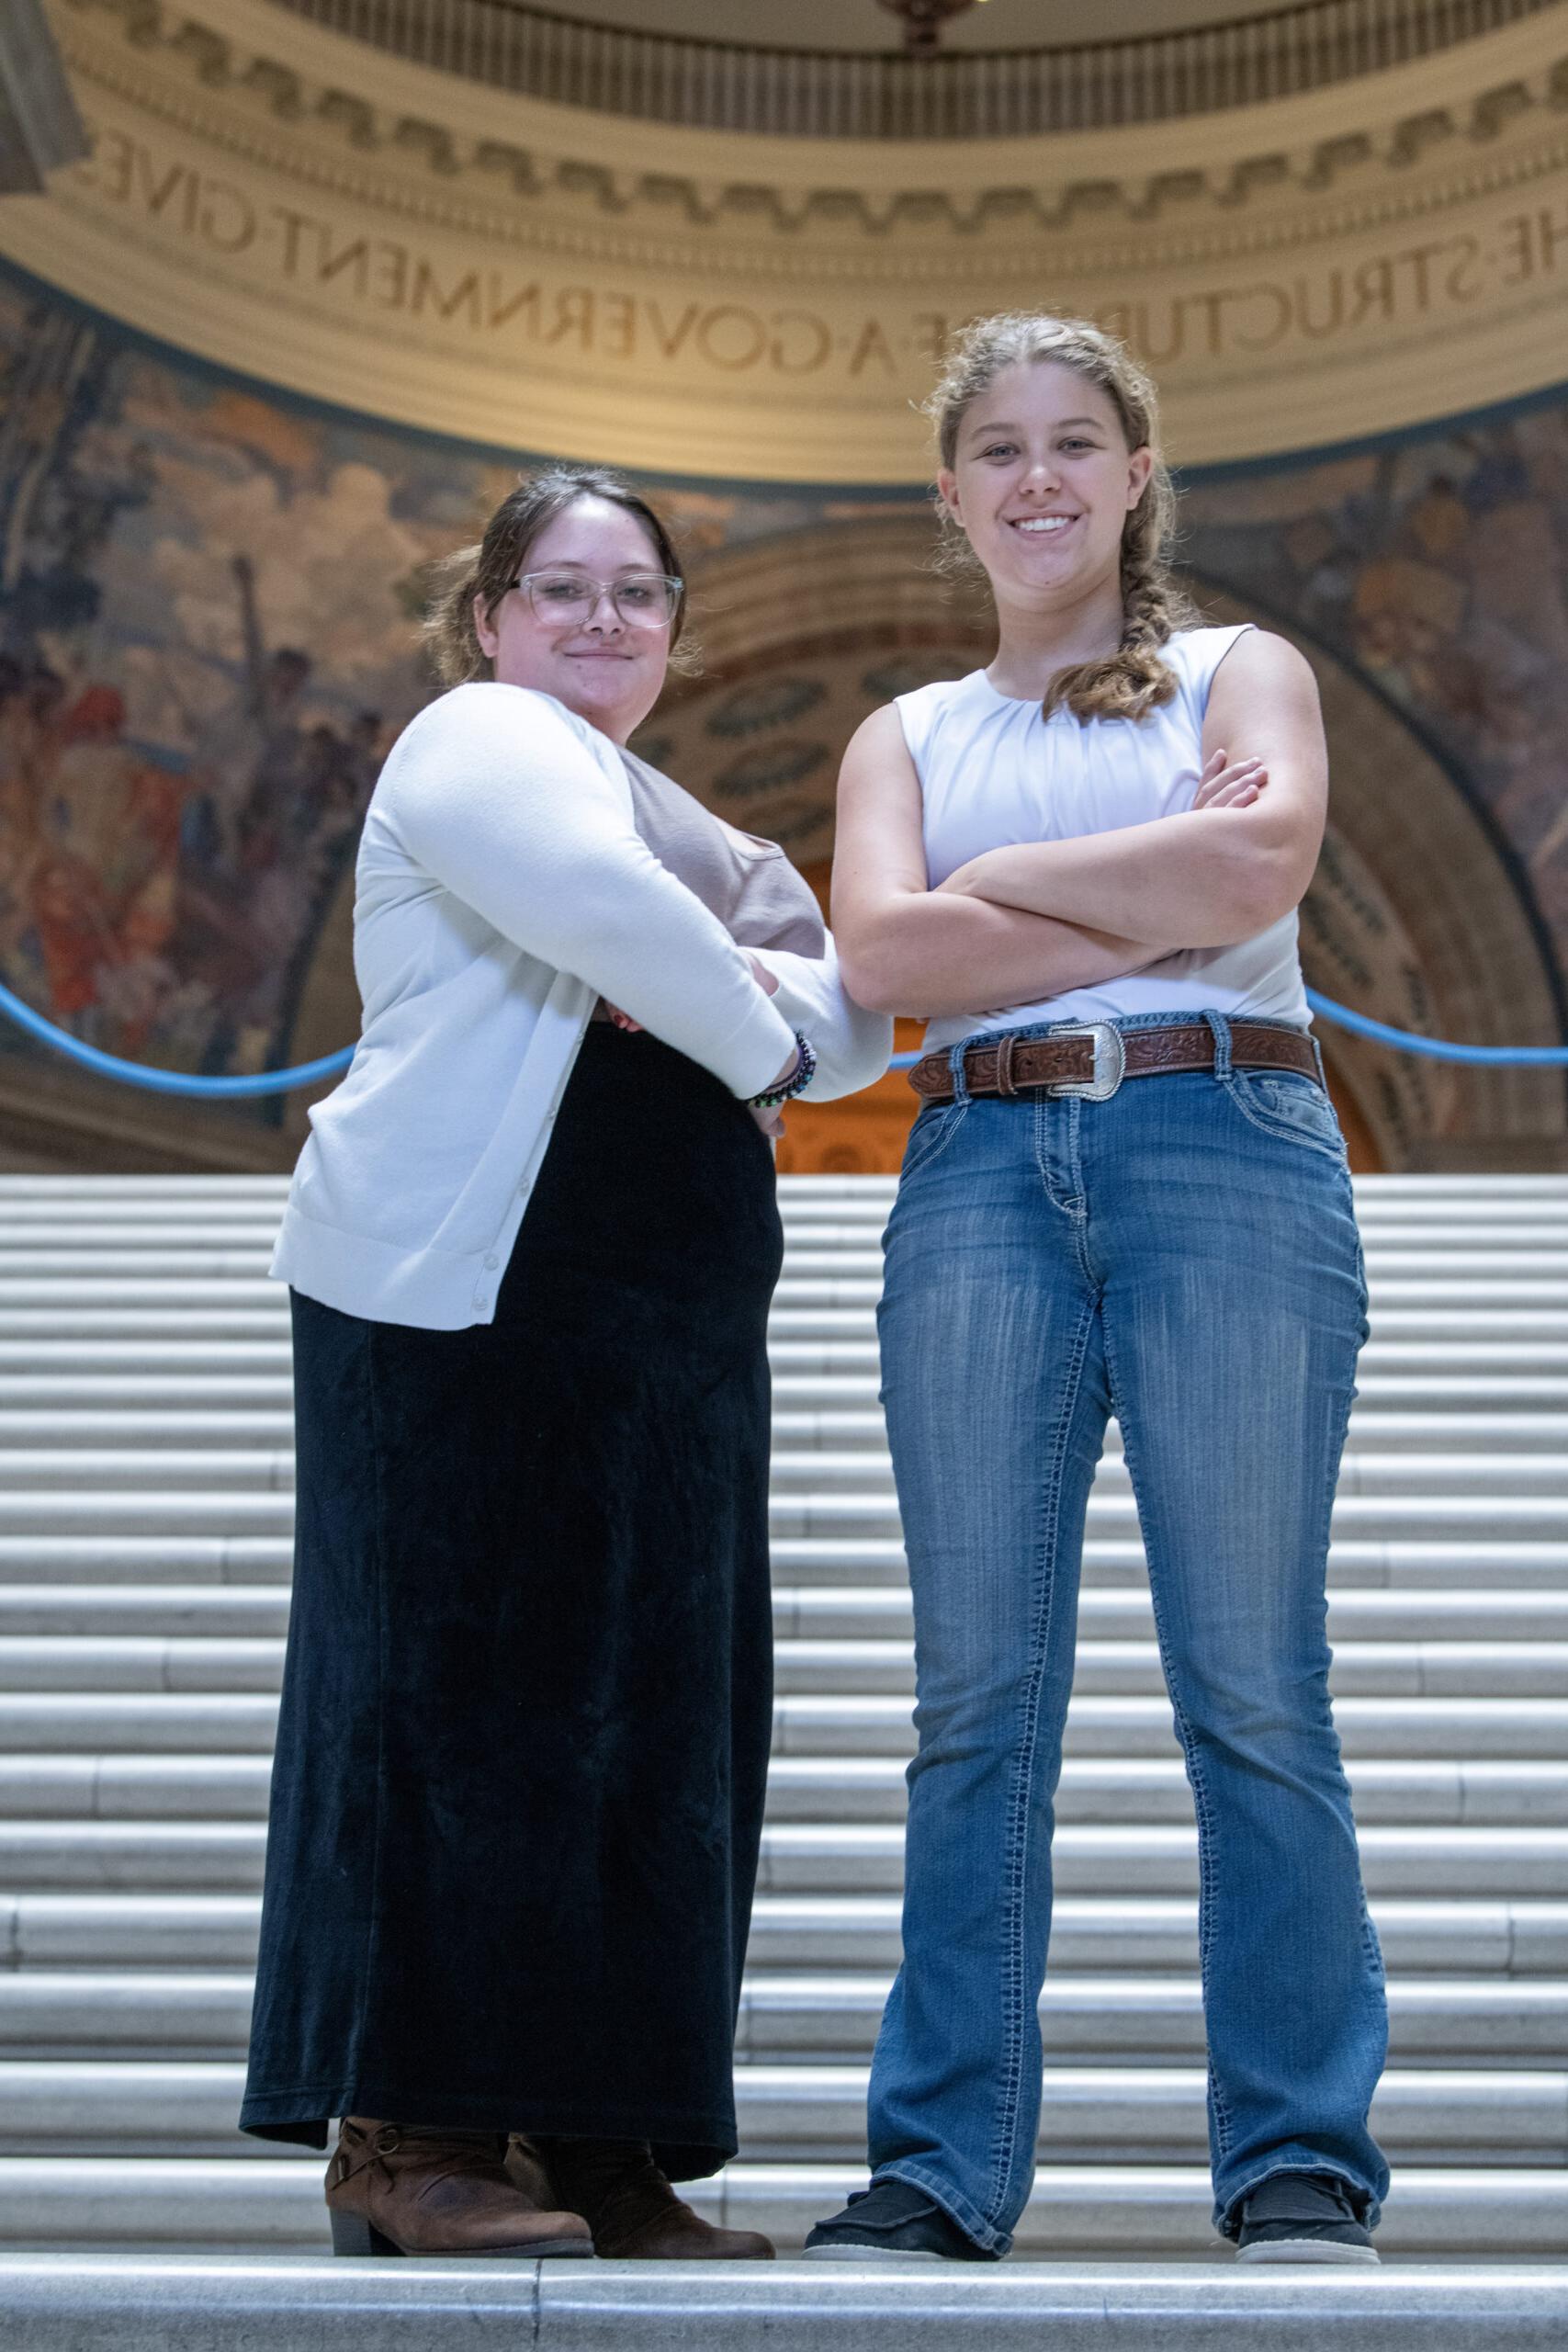 Two students posing with their arms crossed on the steps of a government building